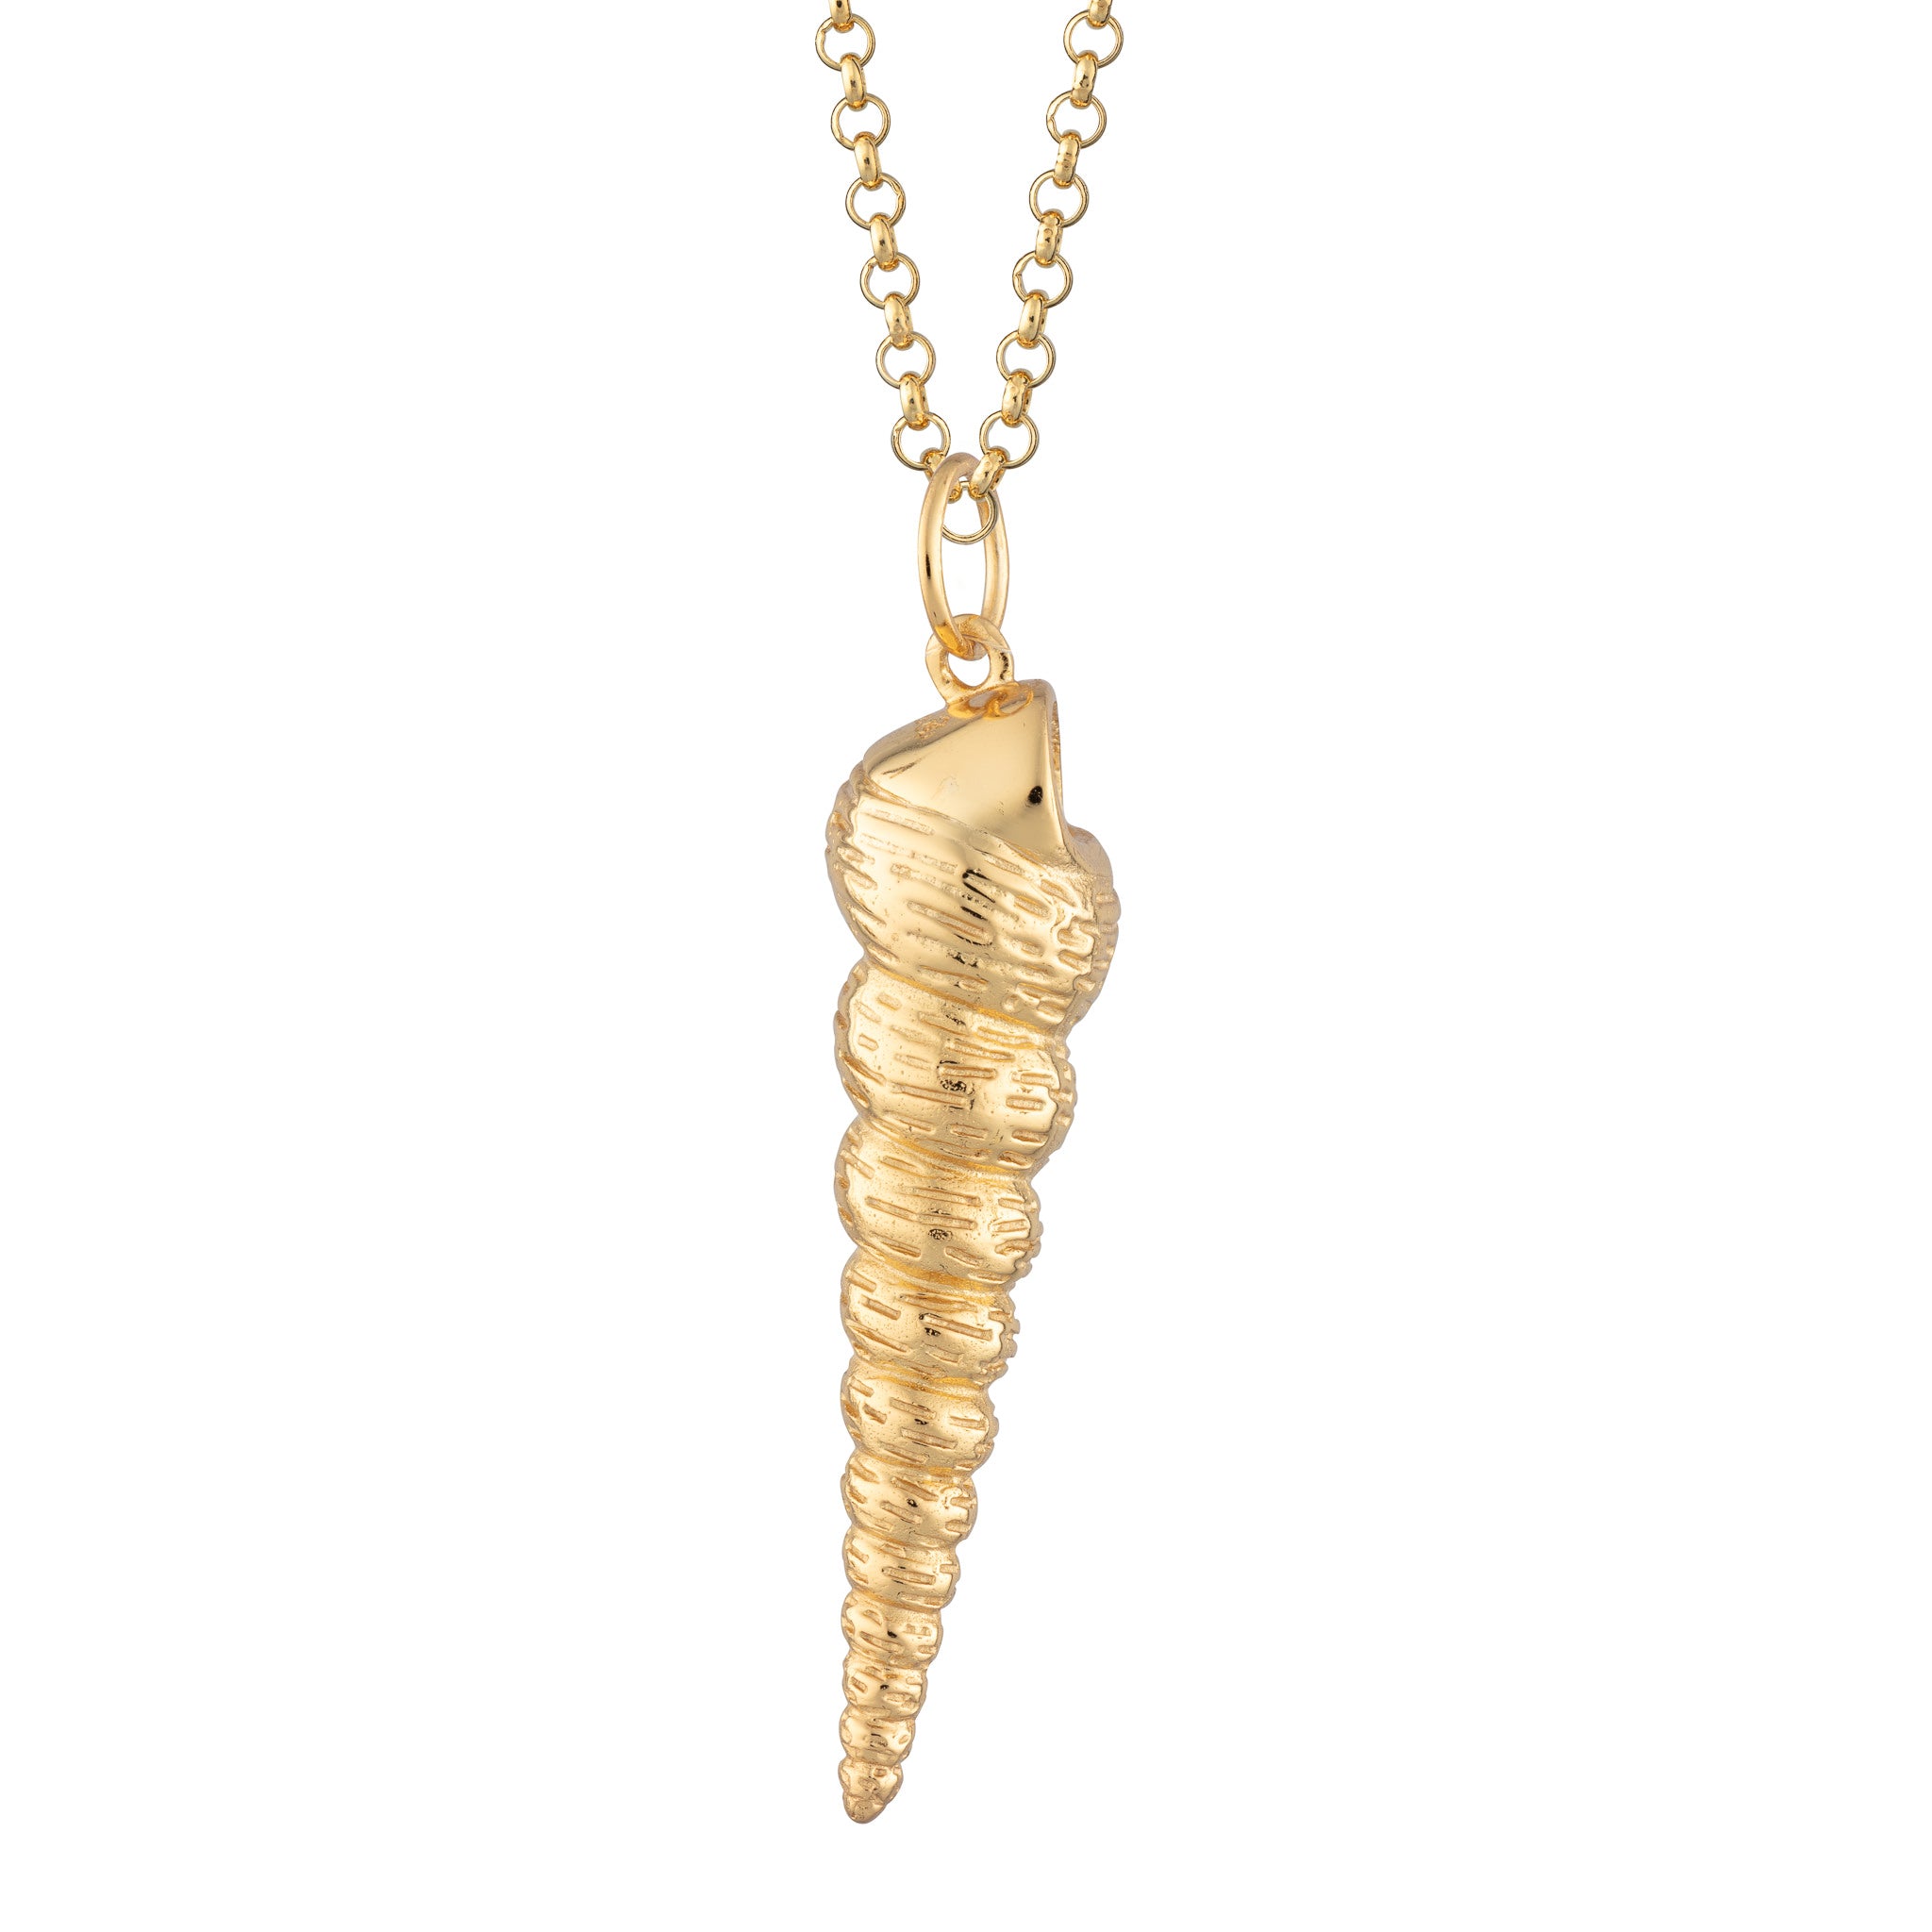 Gold Plated - Standard Chain Length Hannah Martin Spire Shell Necklace - by Scream Pretty